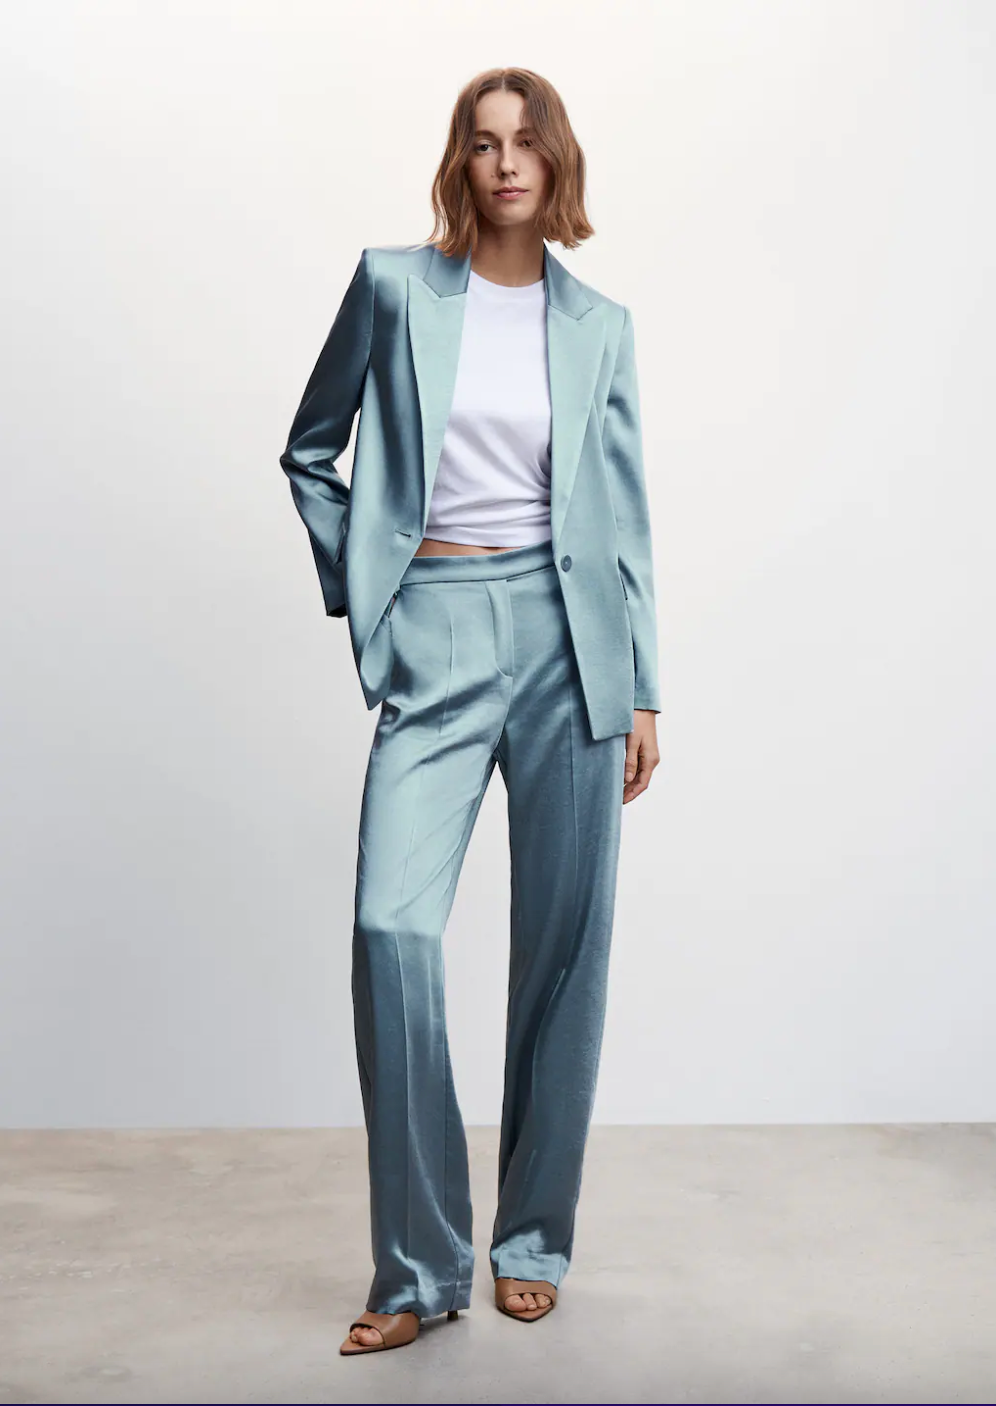 Slim Fitting Women Two-piece Suit Set Blazer Pants Formal Occasion Pantsuit  Wedding Guest Outfit Double Breasted Female Tuxedo